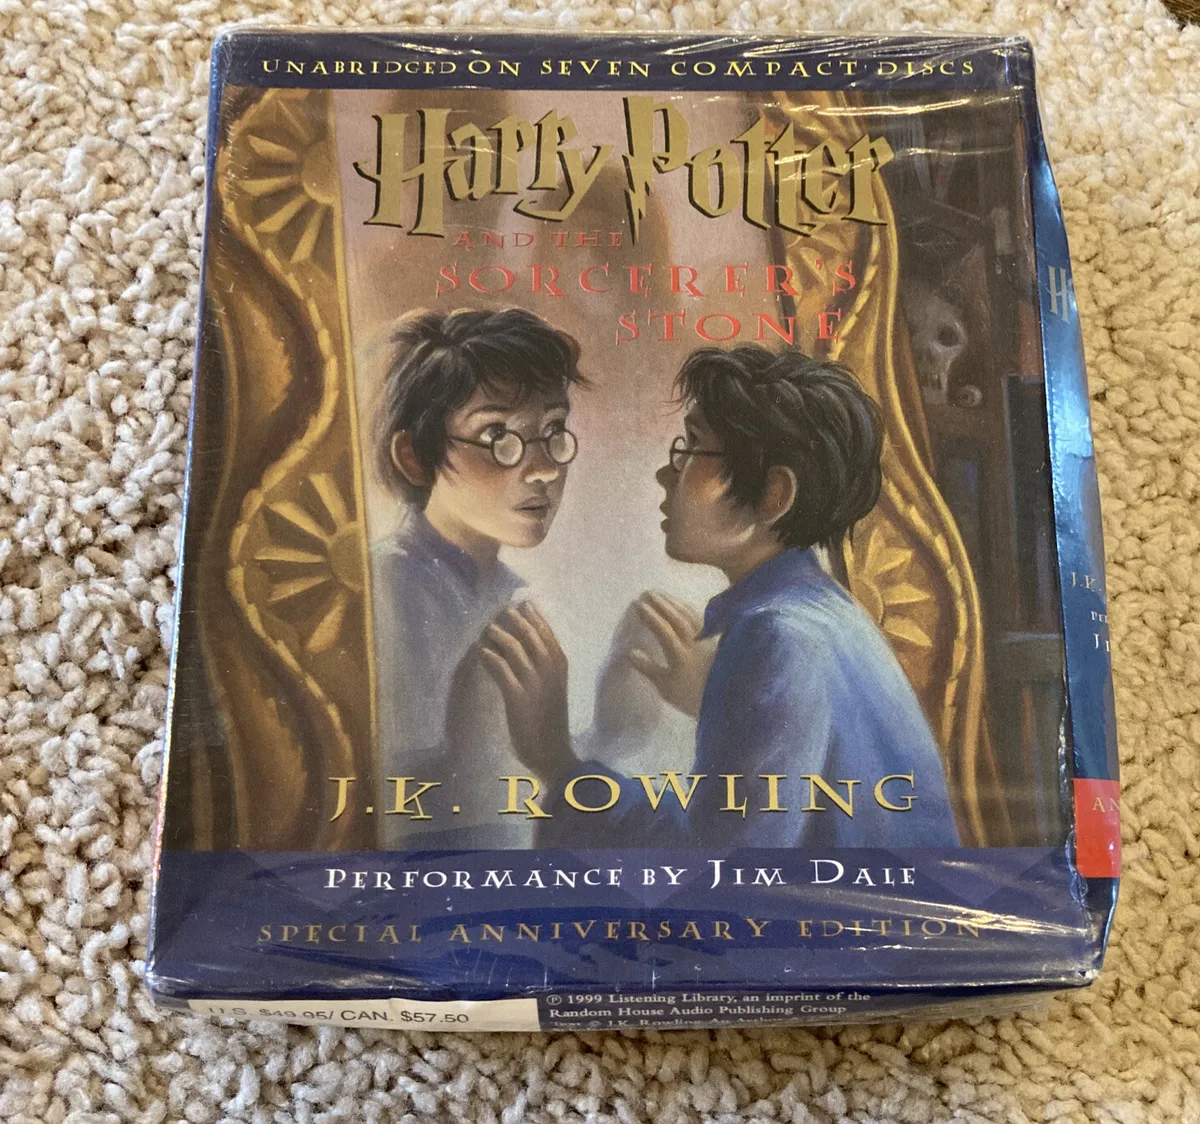 Are there any exclusive signed editions of the Harry Potter audiobooks? 2